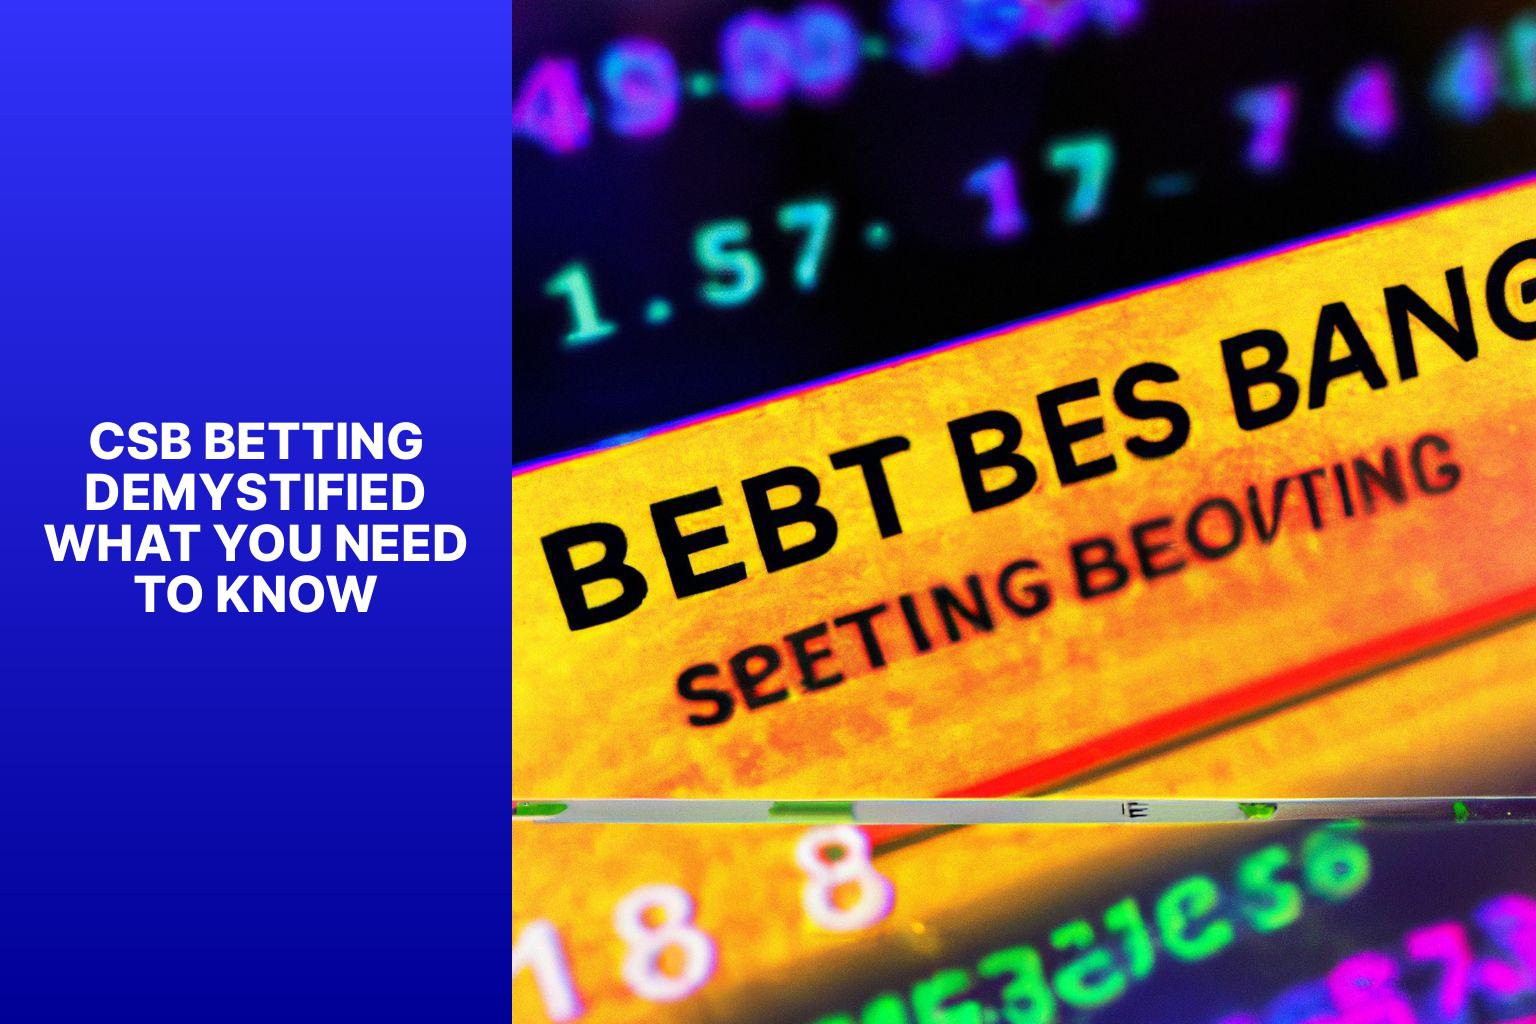 CSB Betting Demystified What You Need to Know